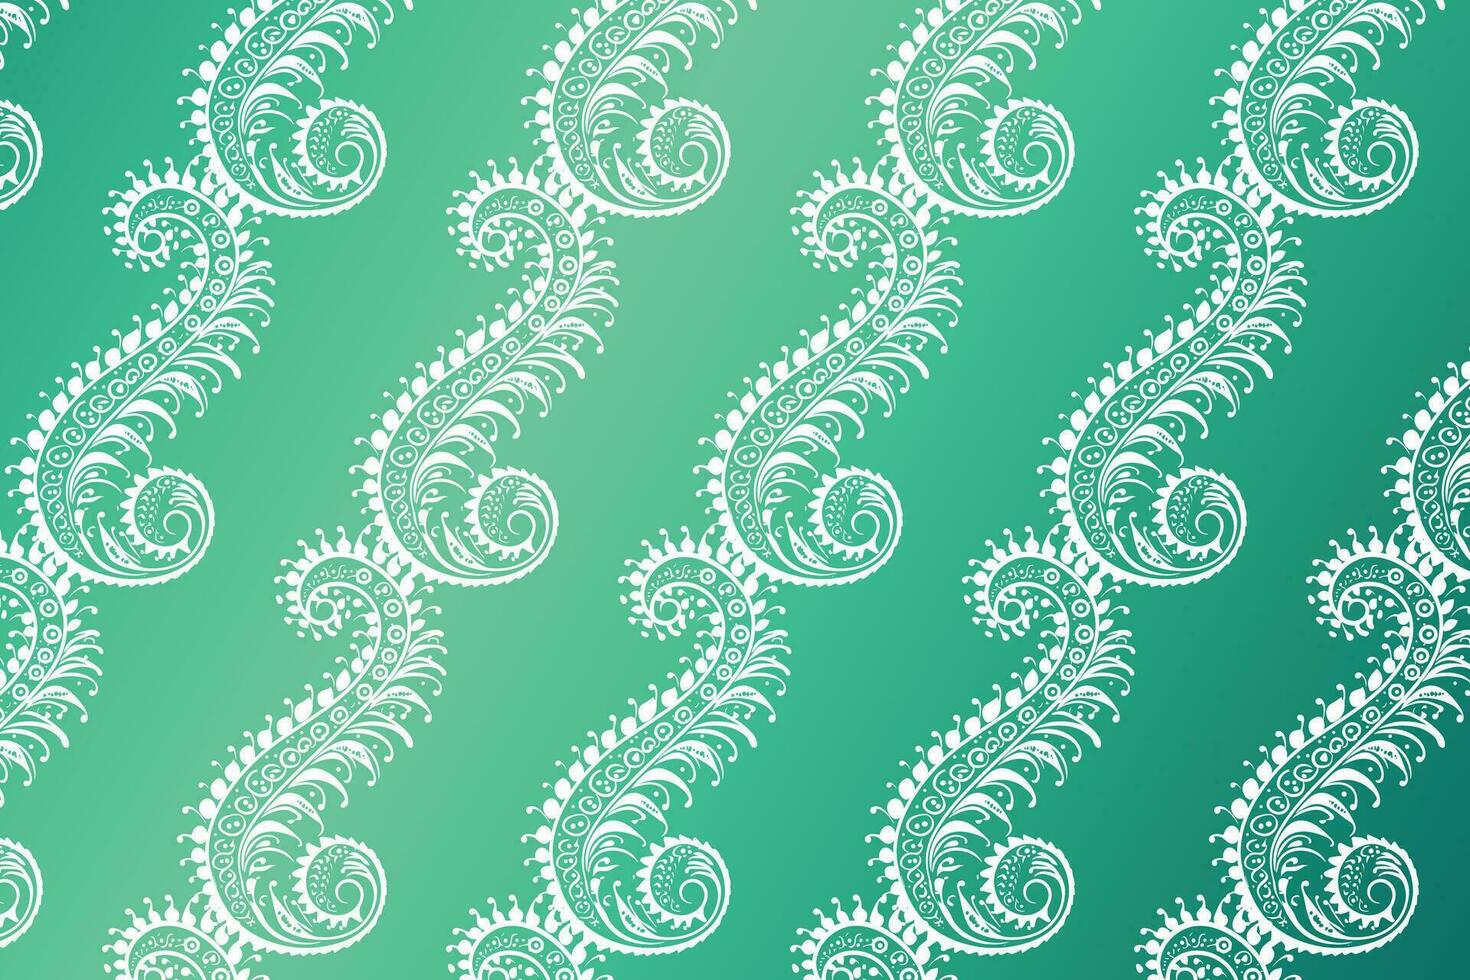 White Paisley Pattern on a Green Background vector